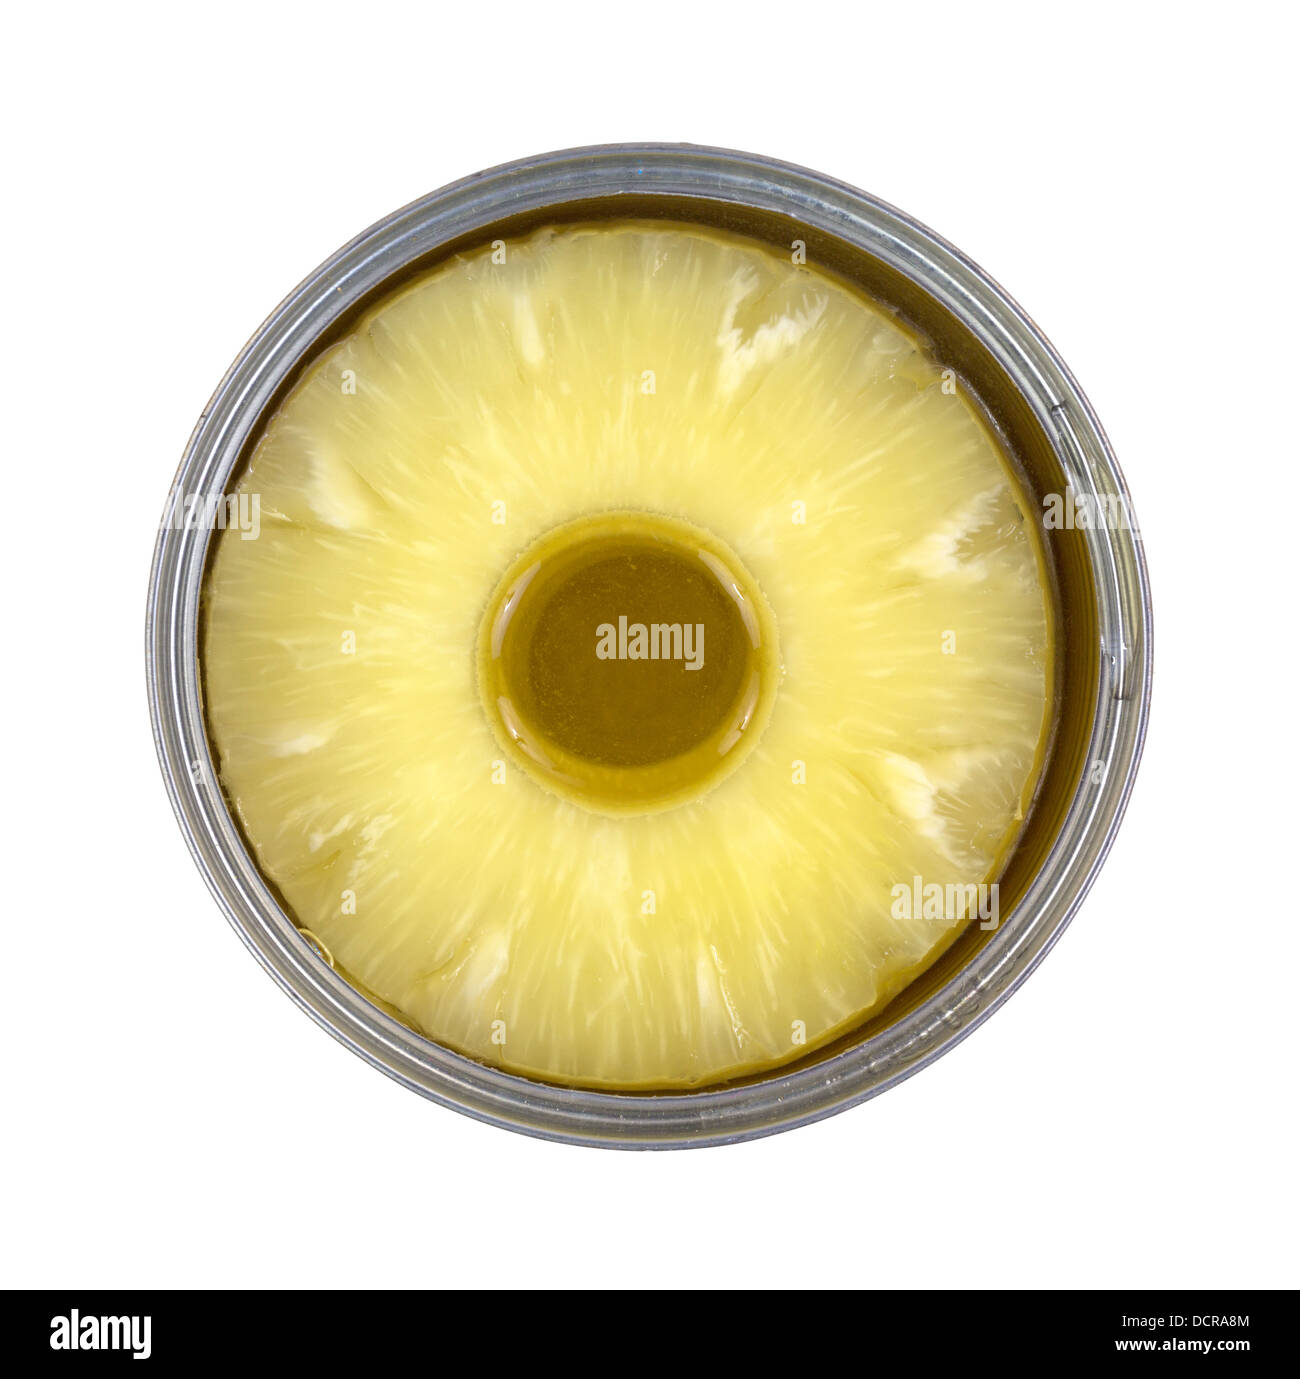 Top view of a tin can filled with cored pineapple rings on a white background. Stock Photo